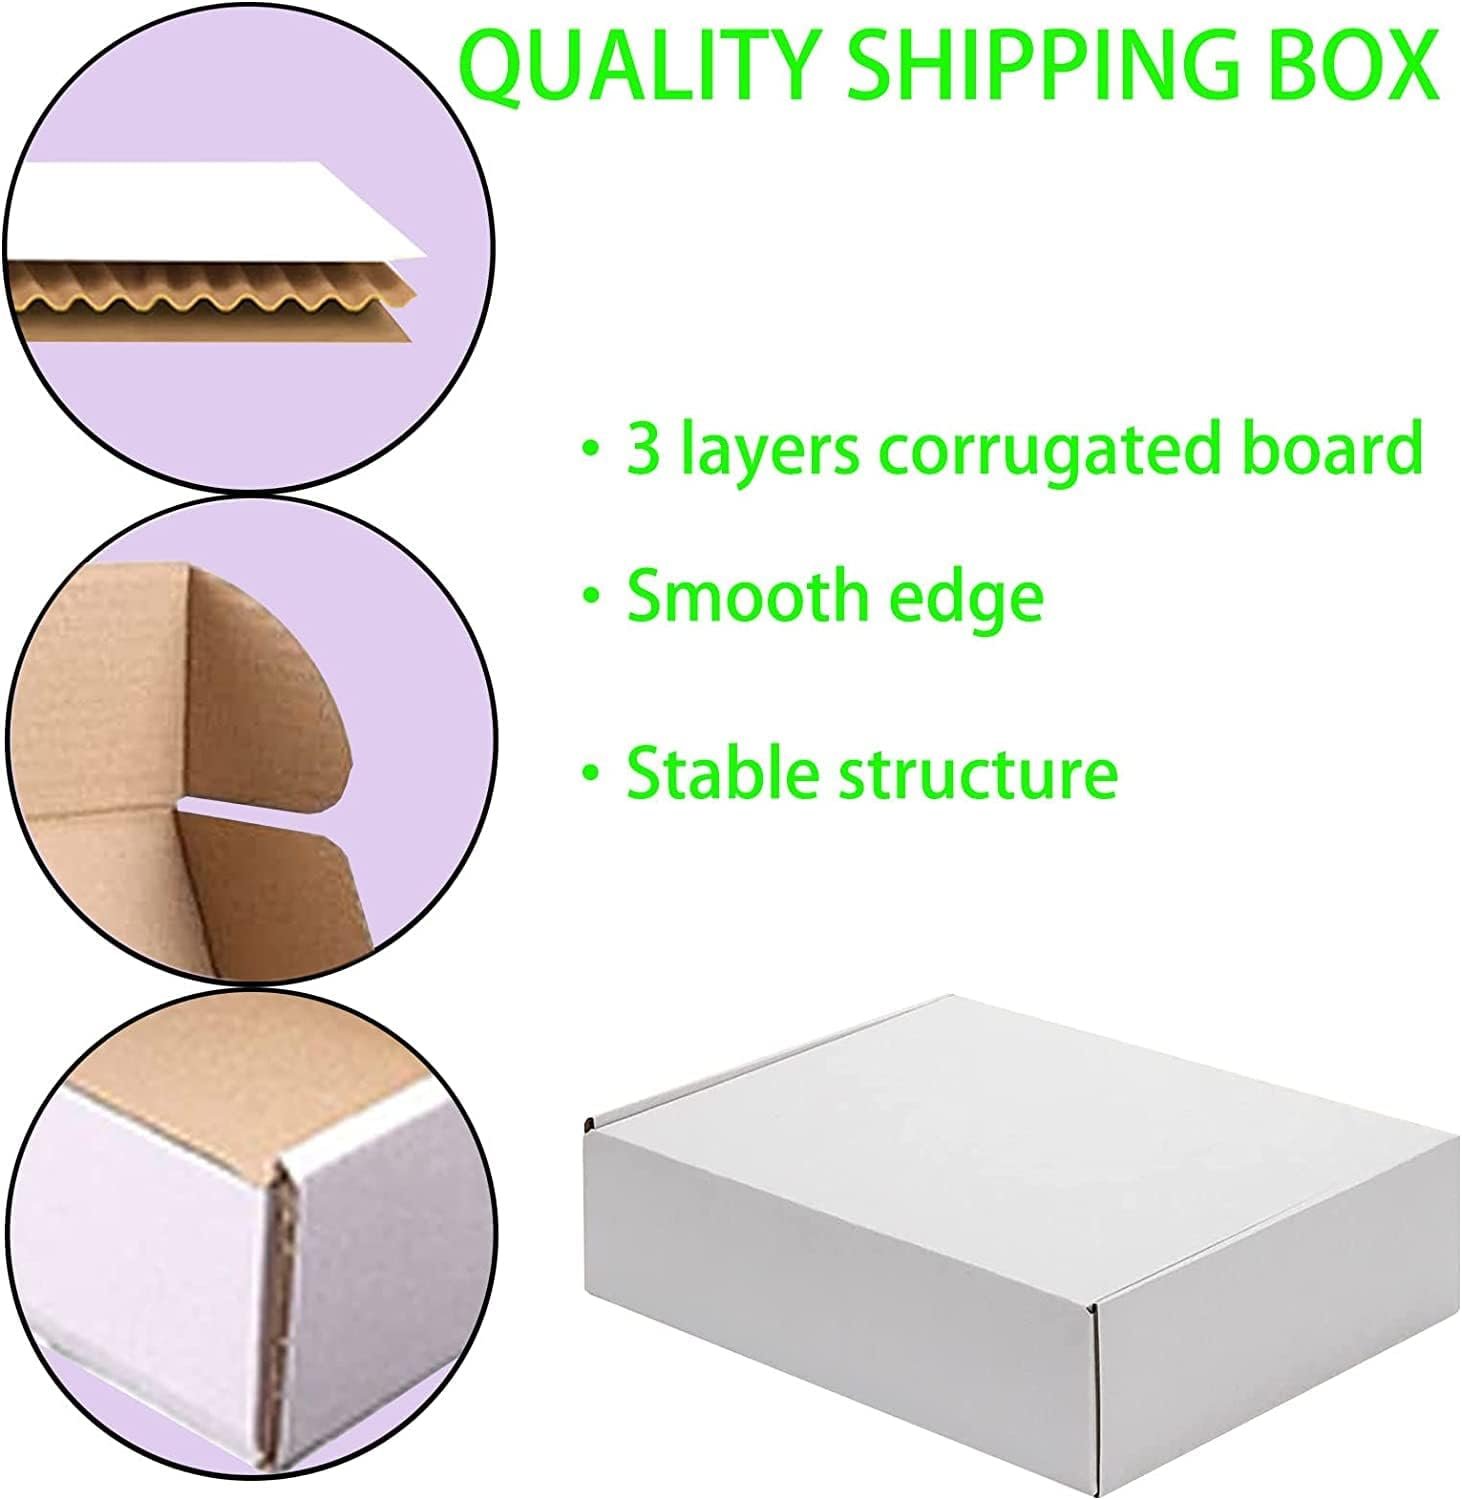 Corrugated Mailing Box Review